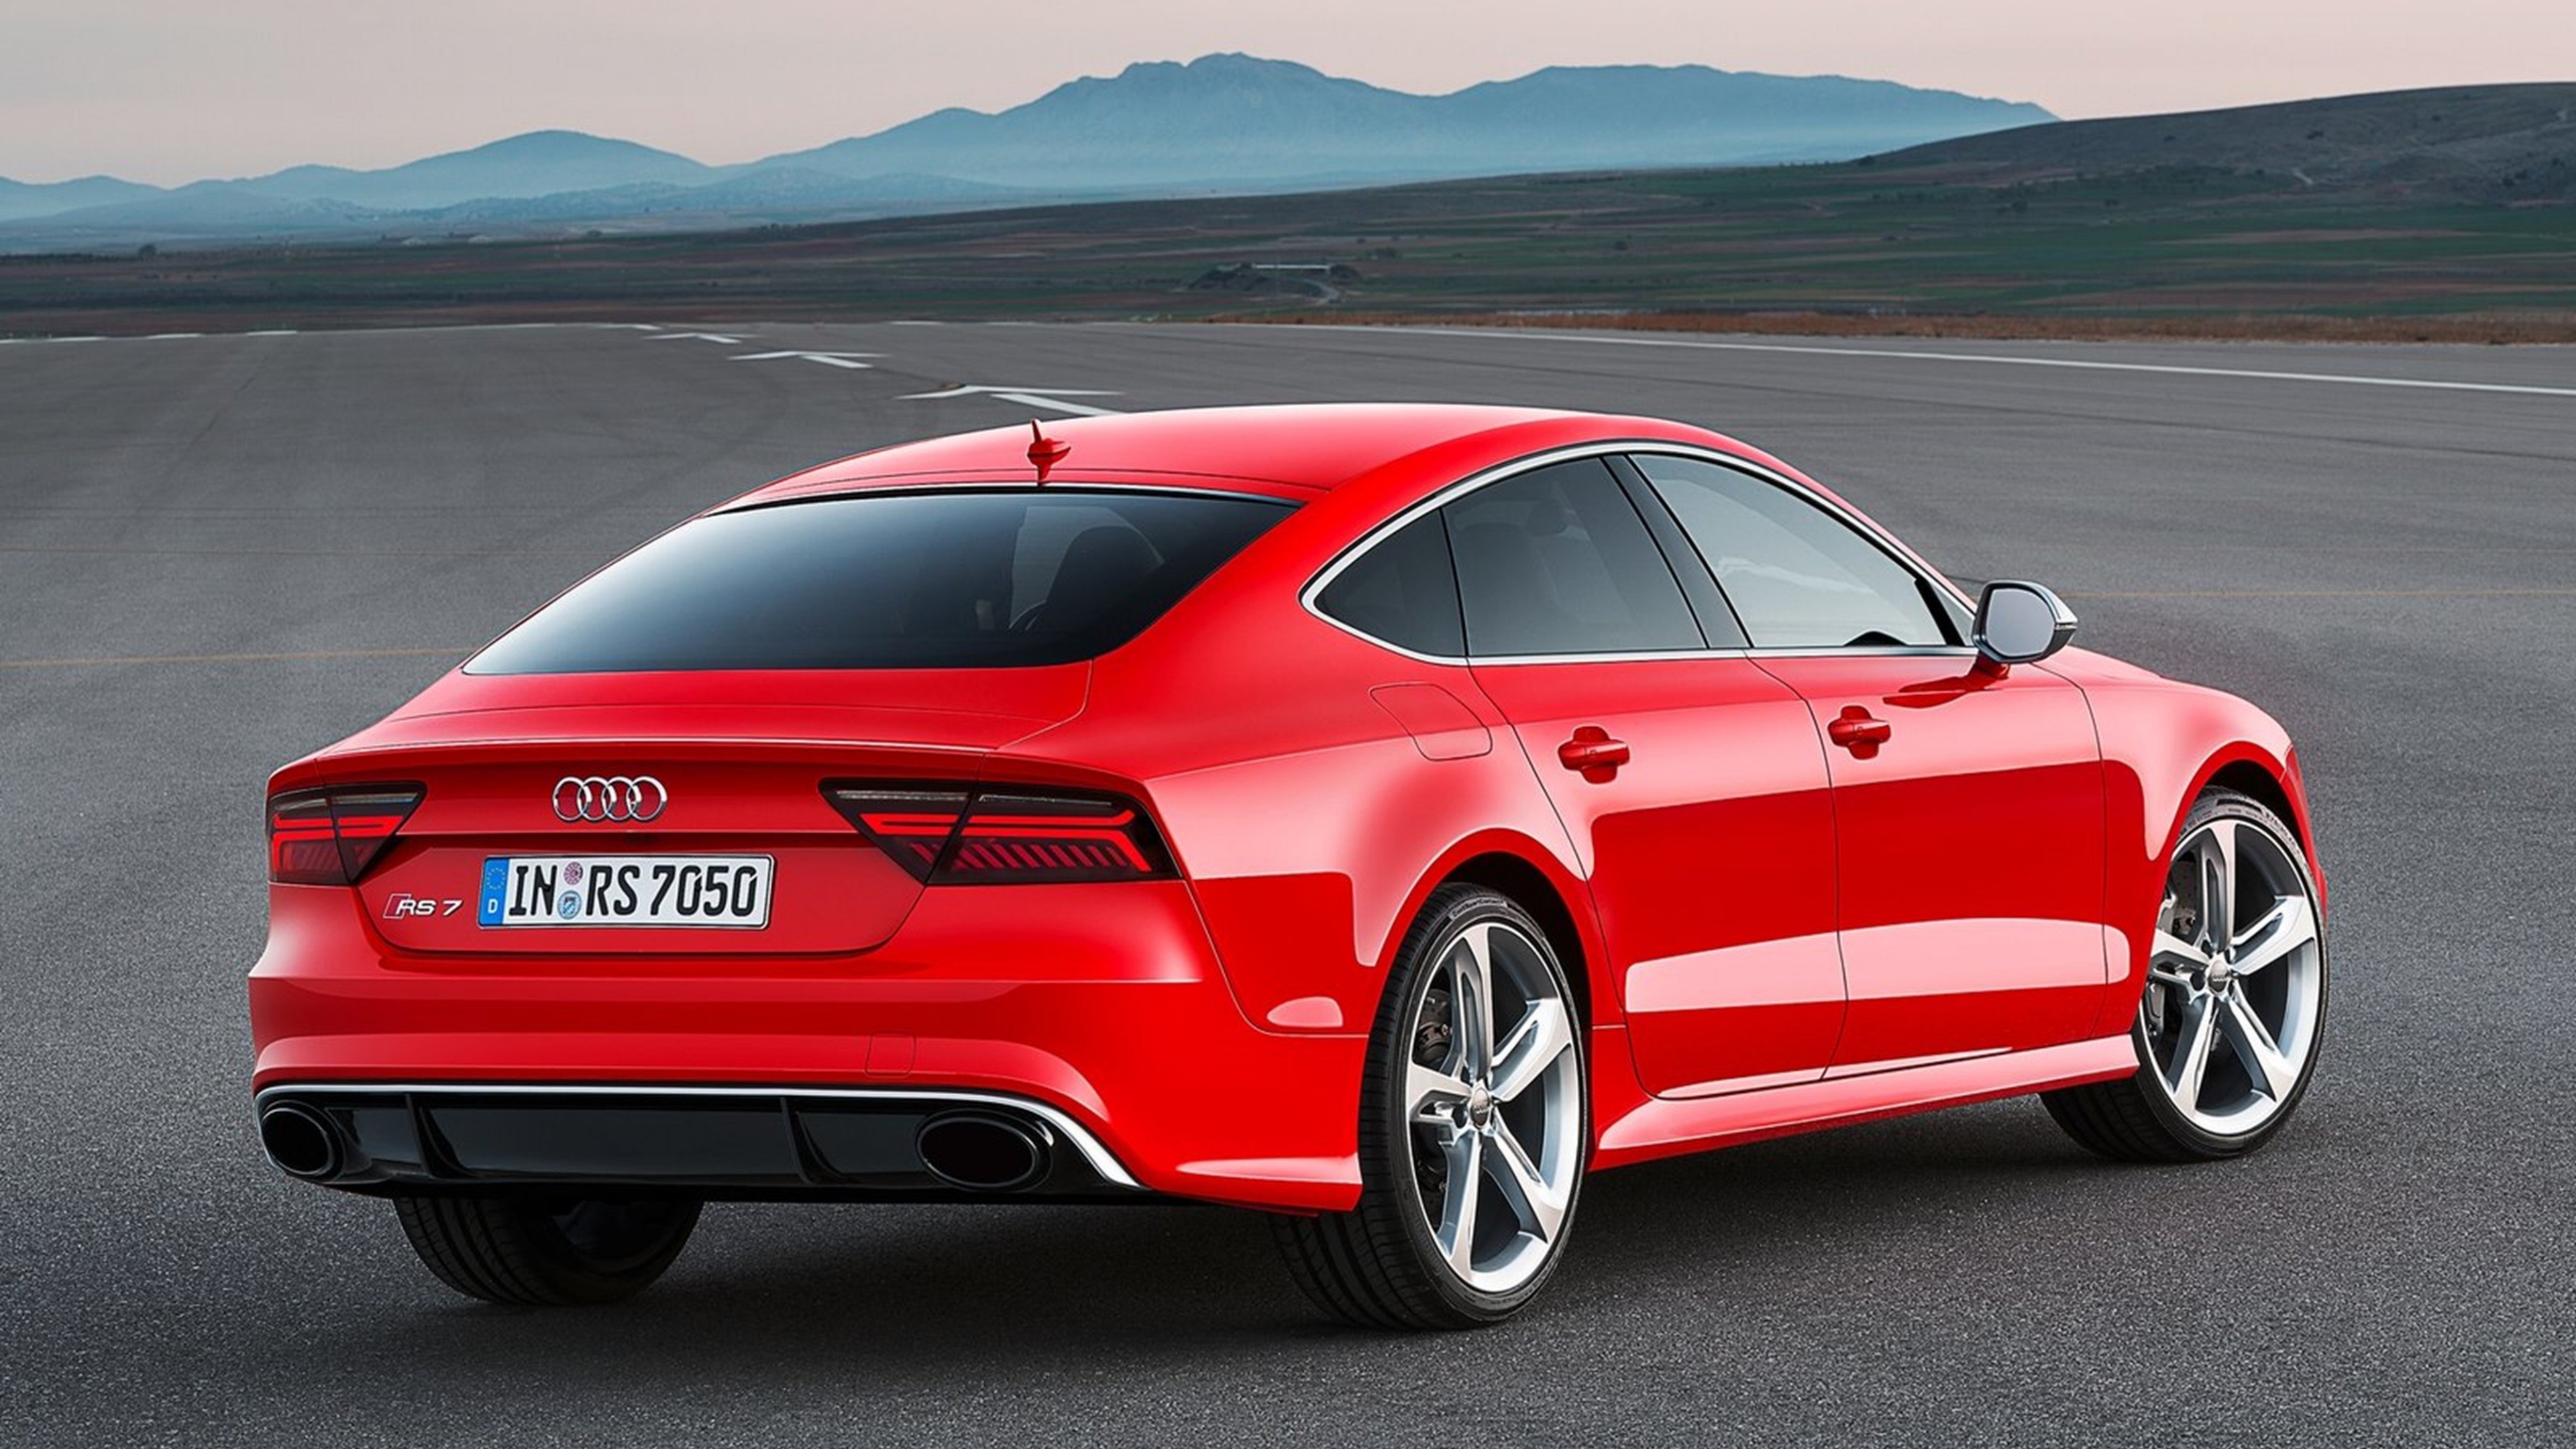 More Wallpapers - Audi Rs7 Sportback Red , HD Wallpaper & Backgrounds